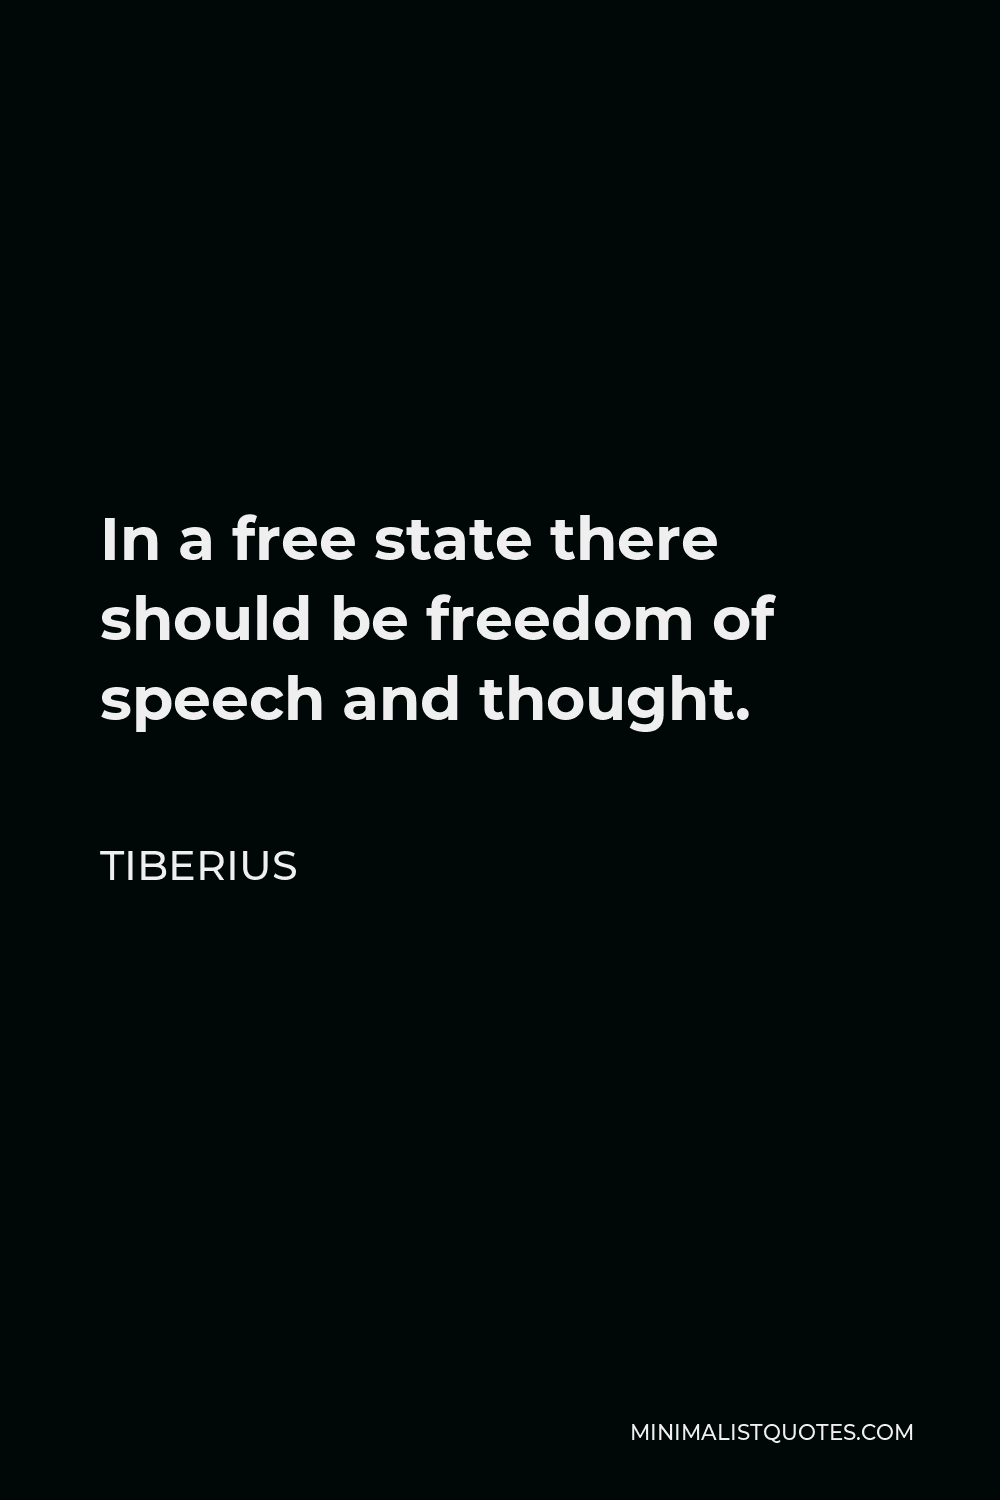 Tiberius Quote - In a free state there should be freedom of speech and thought.